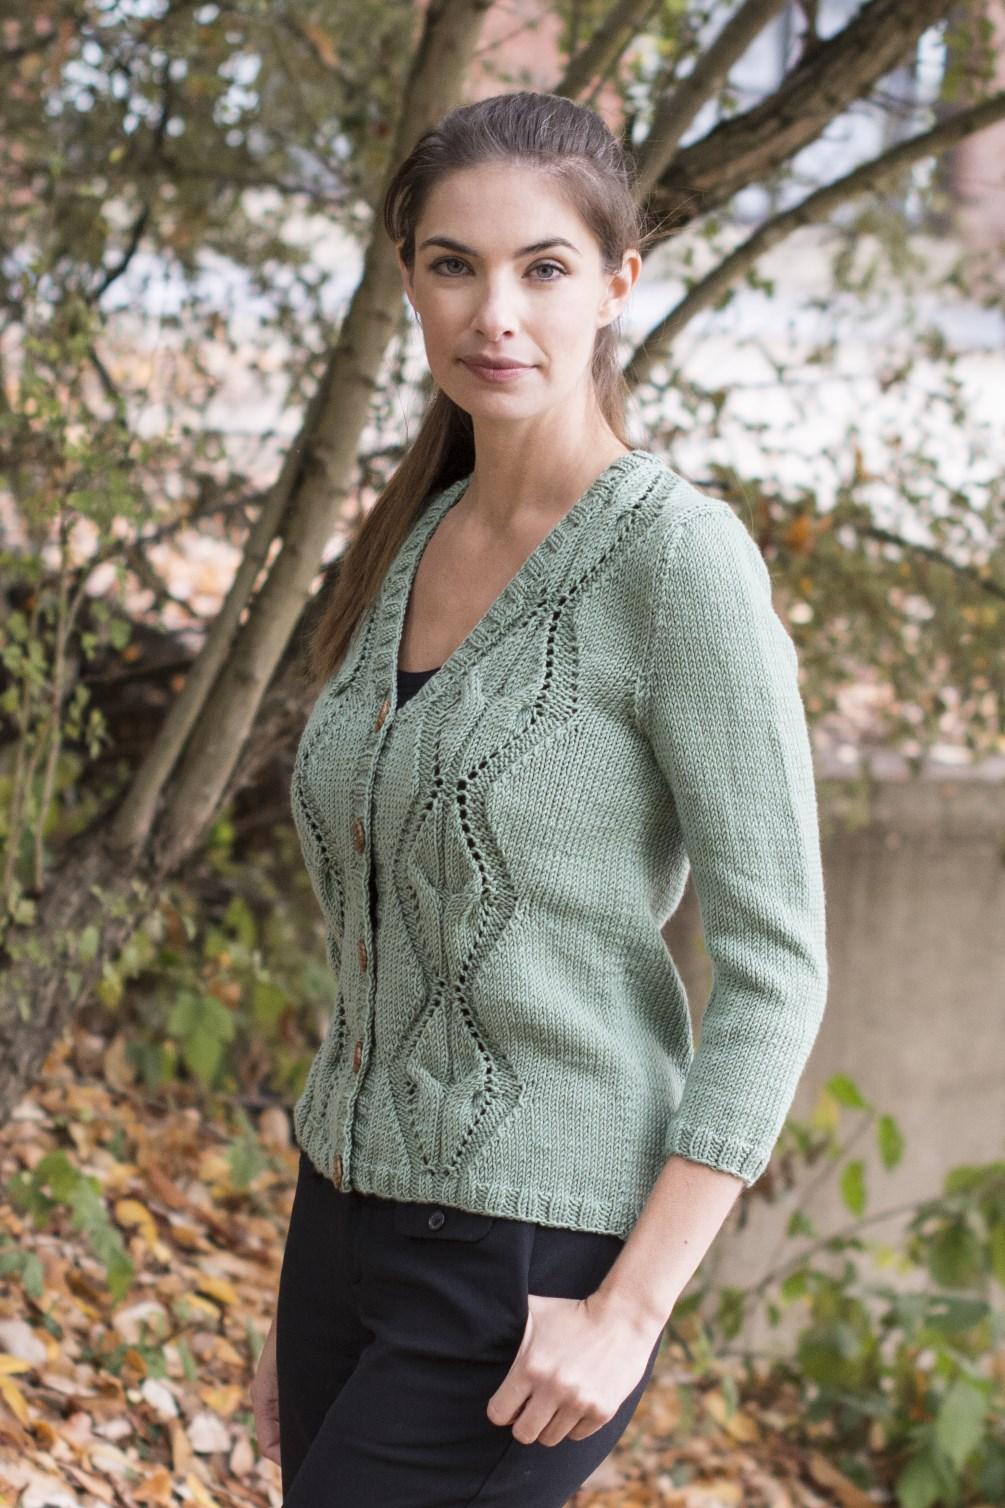 Skill Level: Intermediate Elysian Angel Wings Cardigan Designed by Cheryl Beckerich Size: S (M, L, XL, 2XL, 3XL) Finished Measurements: 36 (40, 44, 48, 52, 56) at Bust 24 (24.25, 25.25, 25.5, 26.